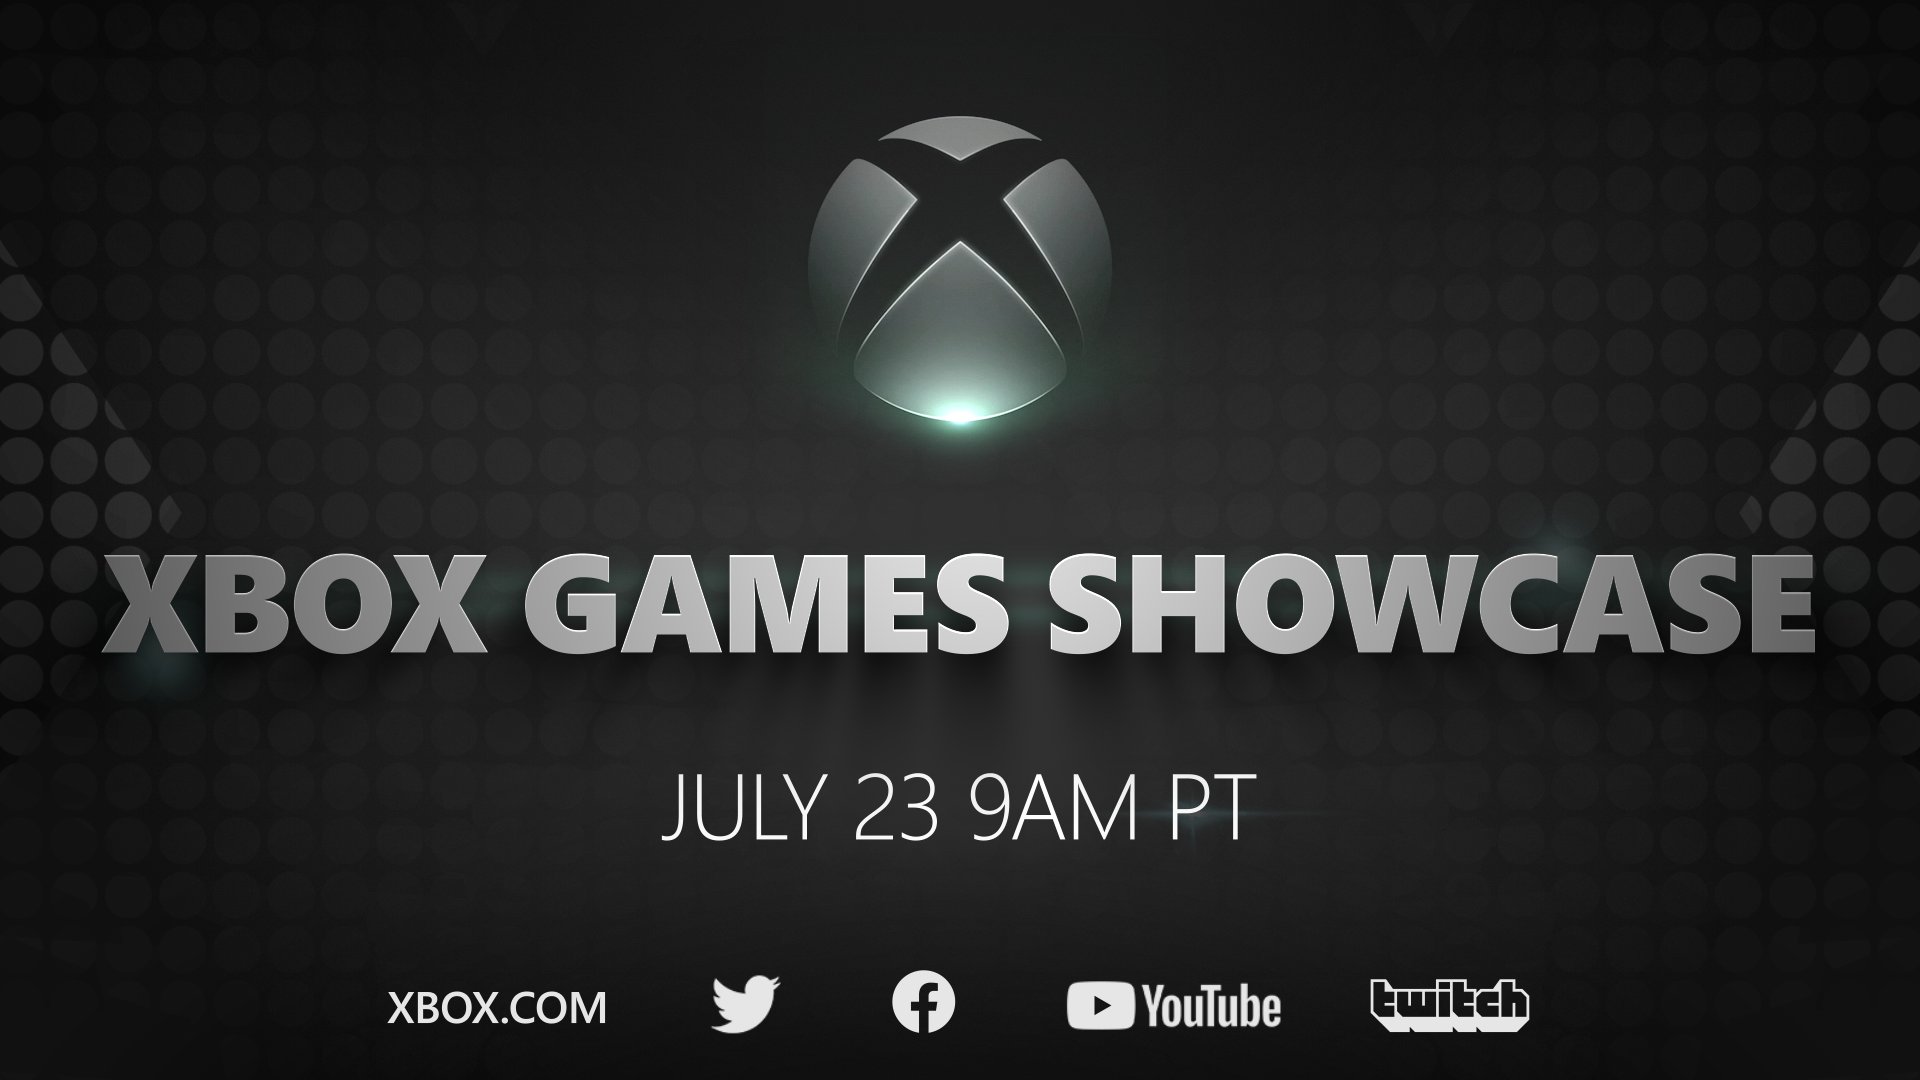 The Xbox Series X games showcase will take place July 23